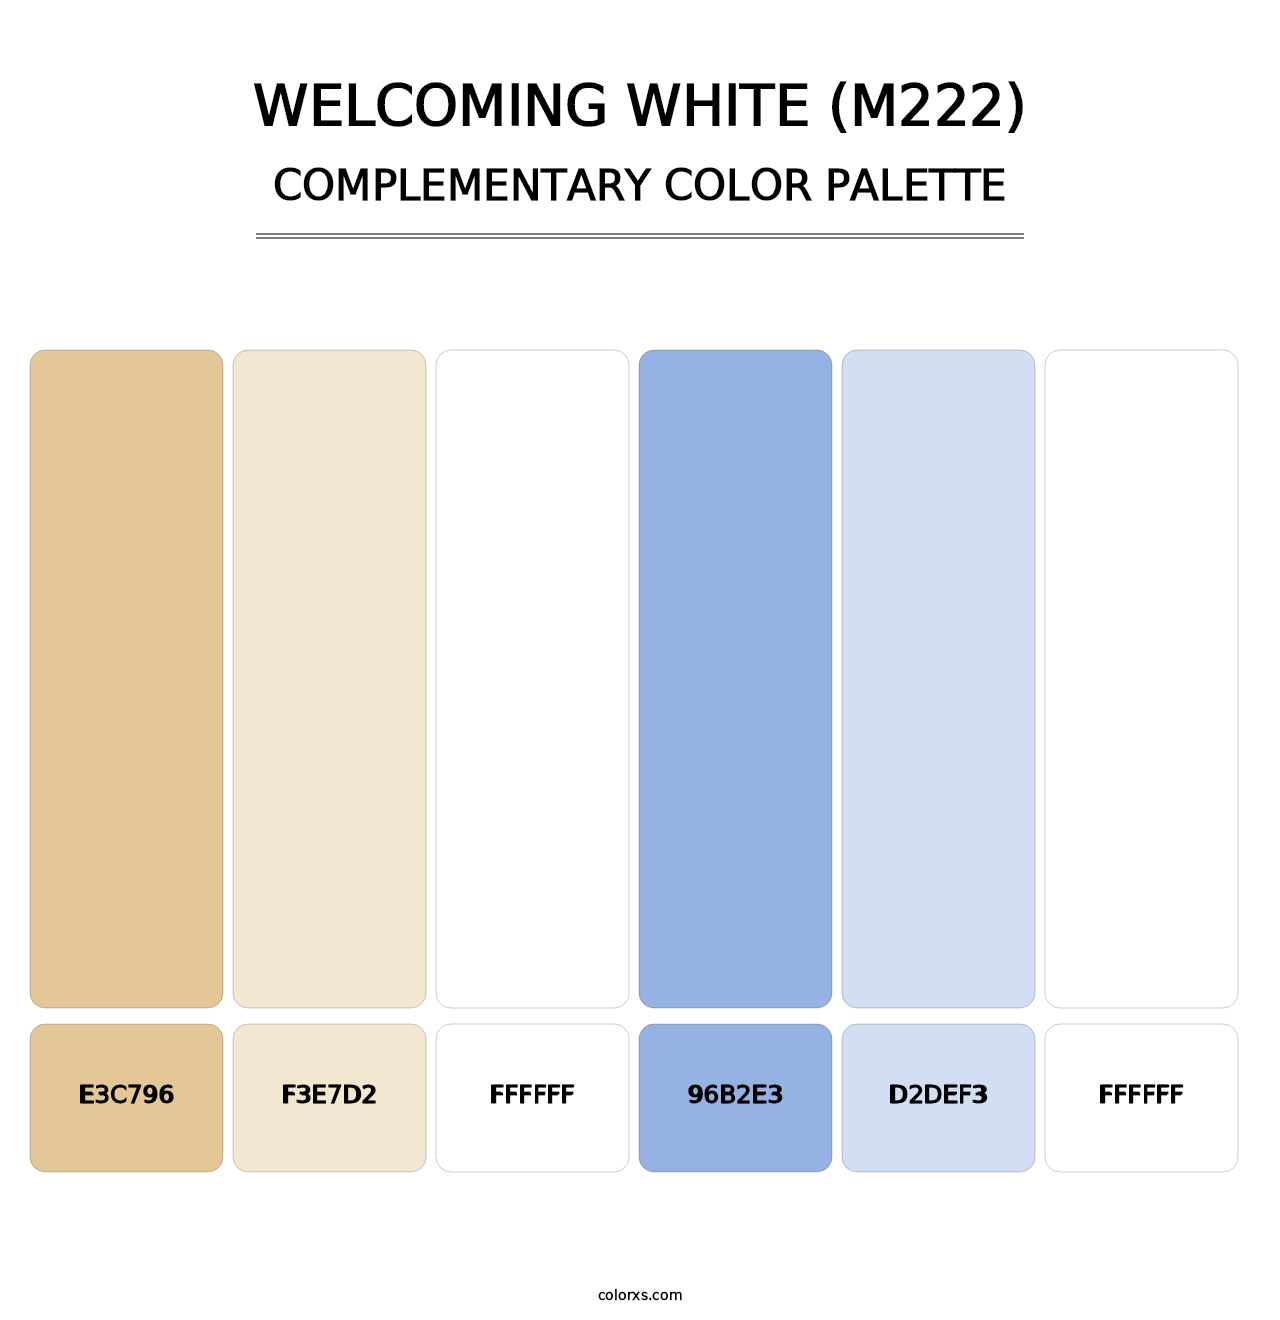 Welcoming White (M222) - Complementary Color Palette